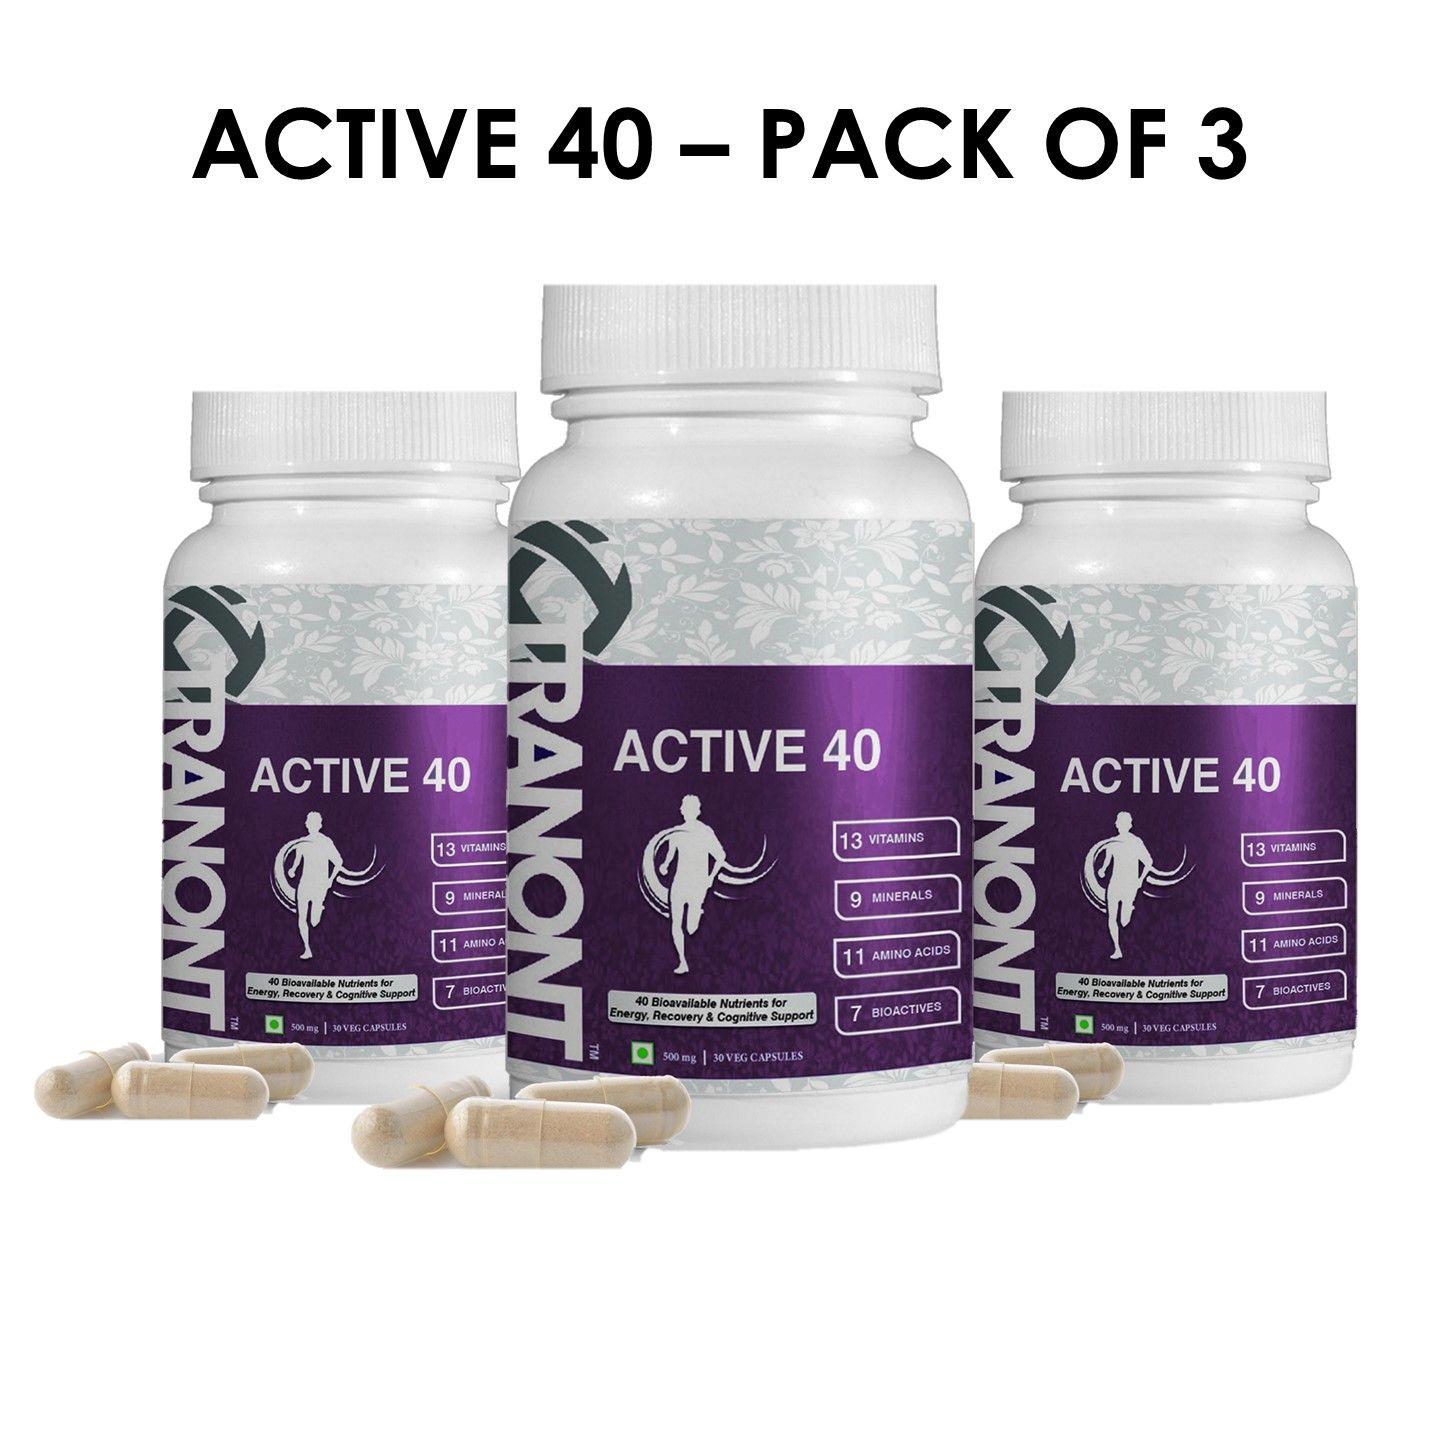 Active 40 - Pack of 3